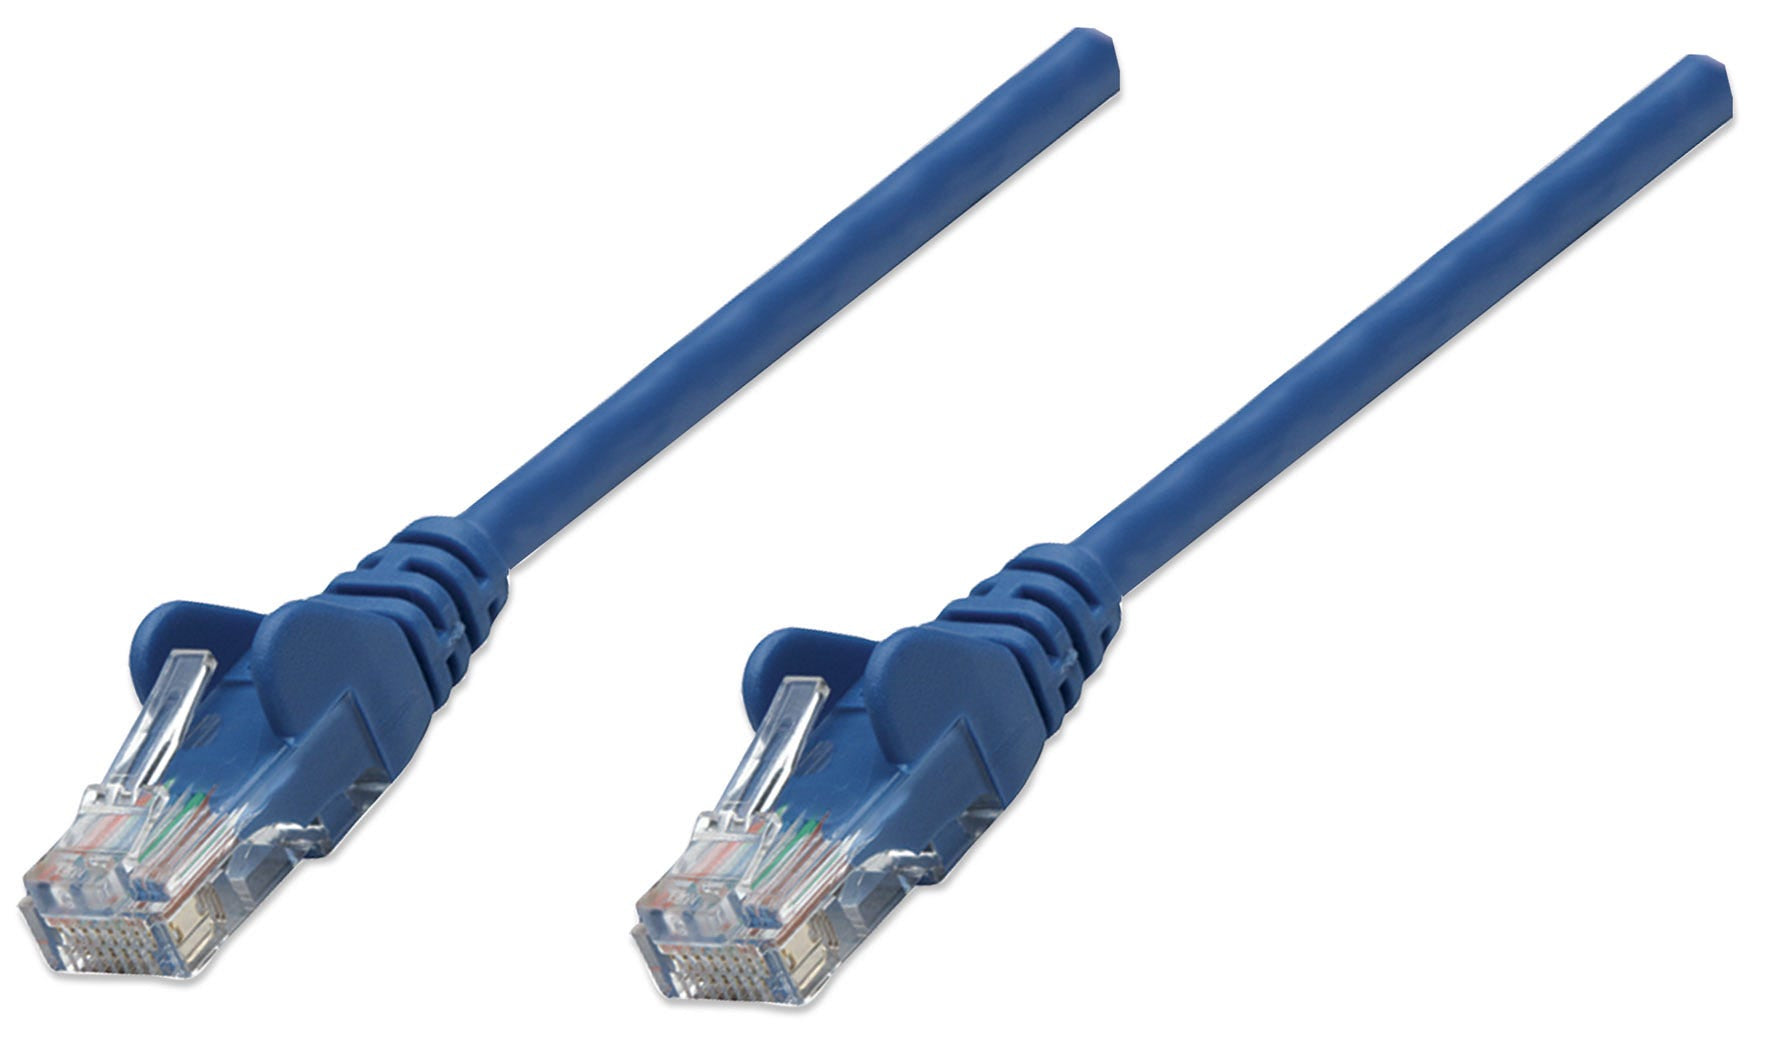 Intellinet Network Patch Cable, Cat5e, 20m, Blue, CCA, U/UTP, PVC, RJ45, Gold Plated Contacts, Snagless, Booted, Lifetime Warranty, Polybag